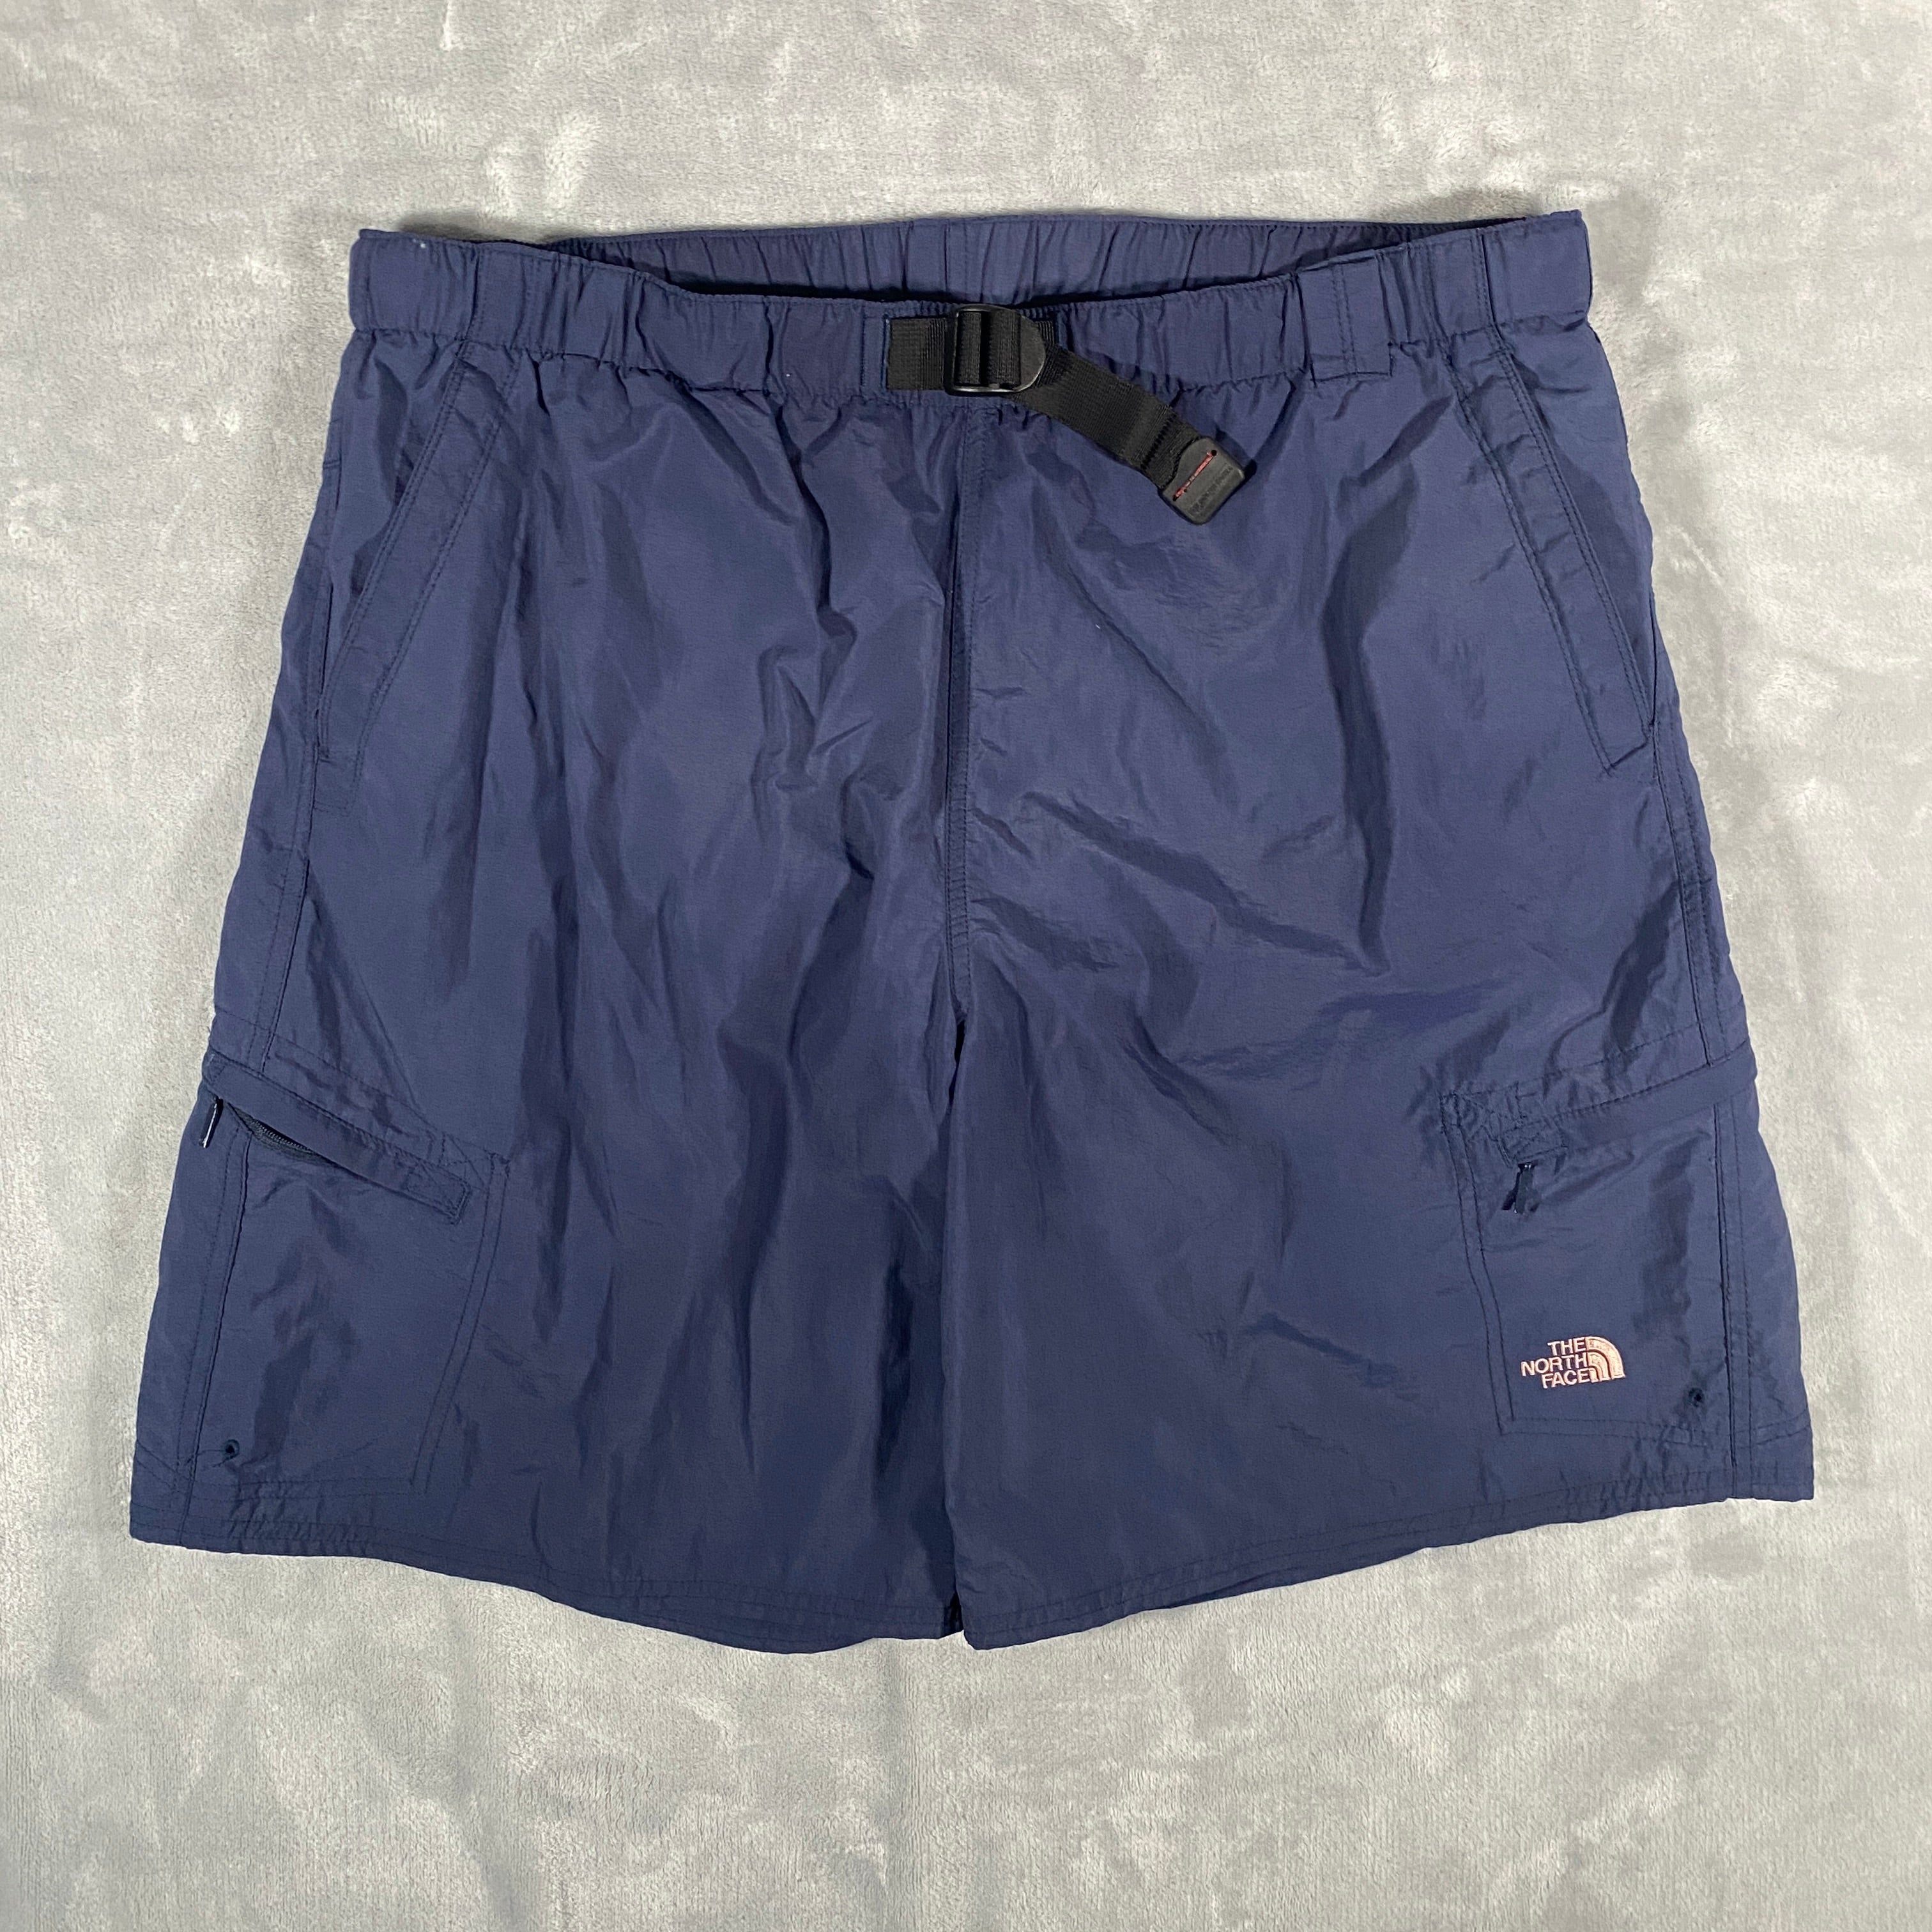 The North Face Mens Shorts Size XL Blue Hiking 100% Nylon Mesh Lined Zip  Pockets